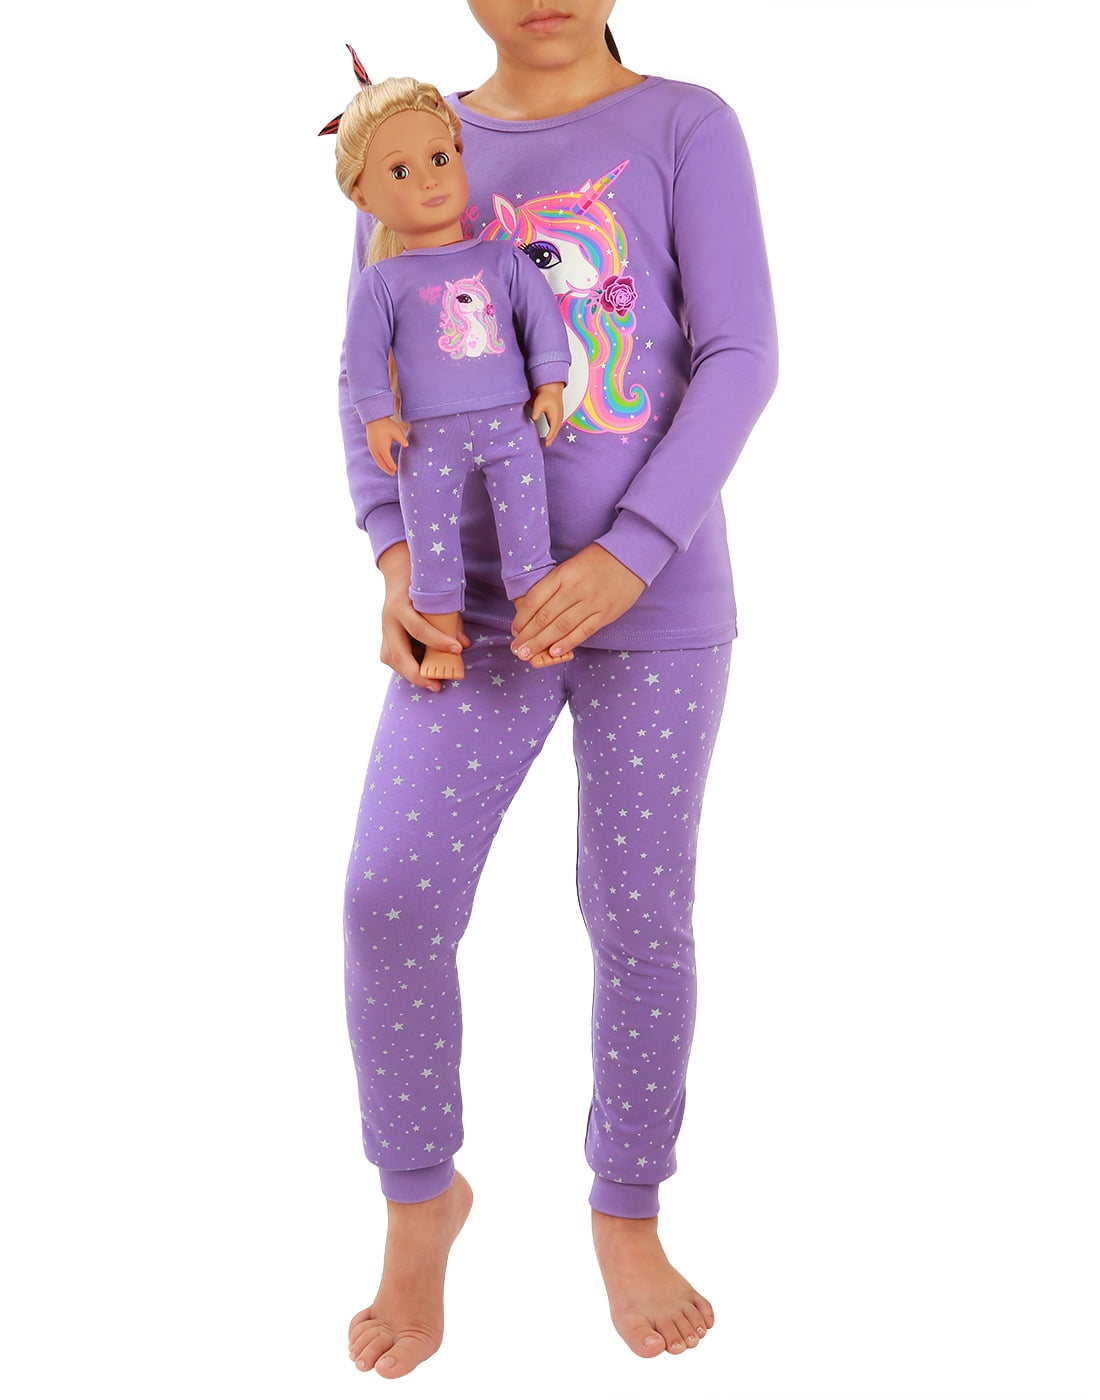 Matching Girl & Doll Pajamas Unicorn Outfit Clothes for Girls and 18 Dolls Pajama Sets 